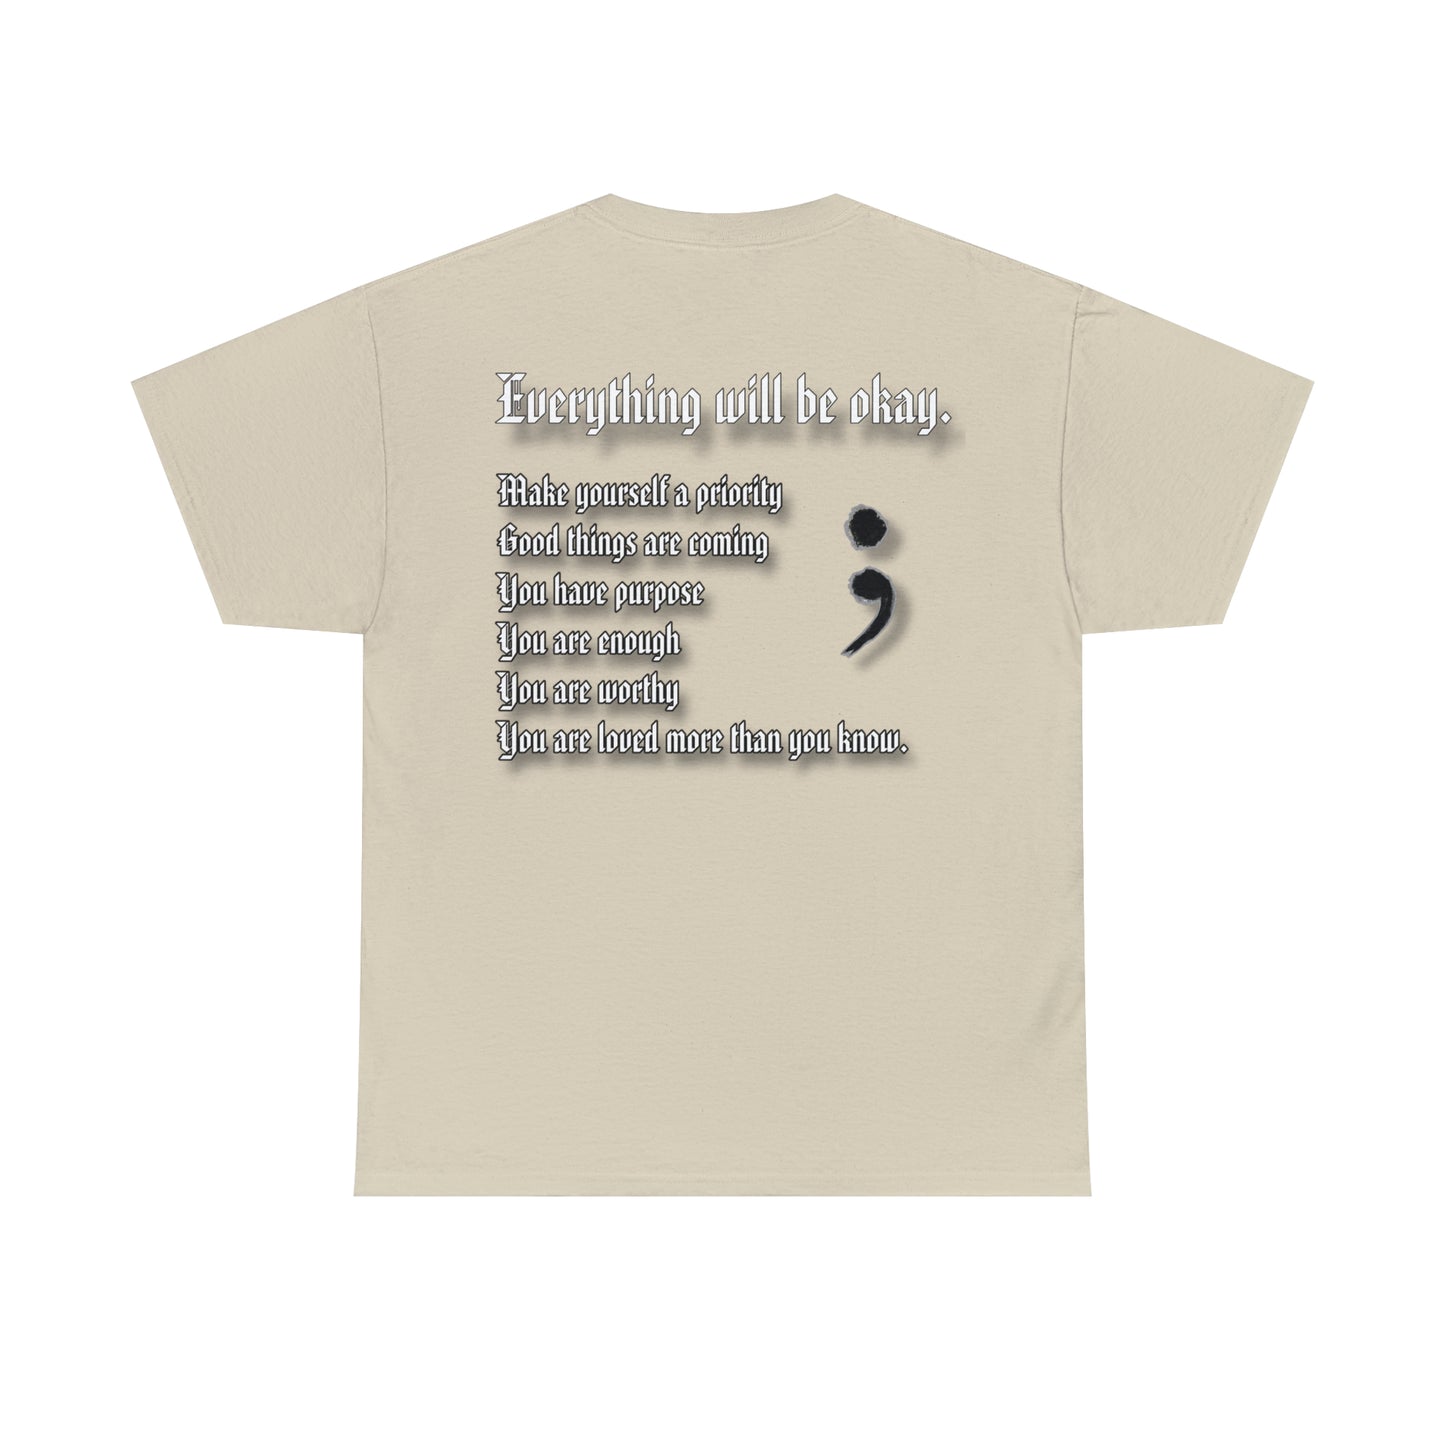 Everything will be okay t-shirt